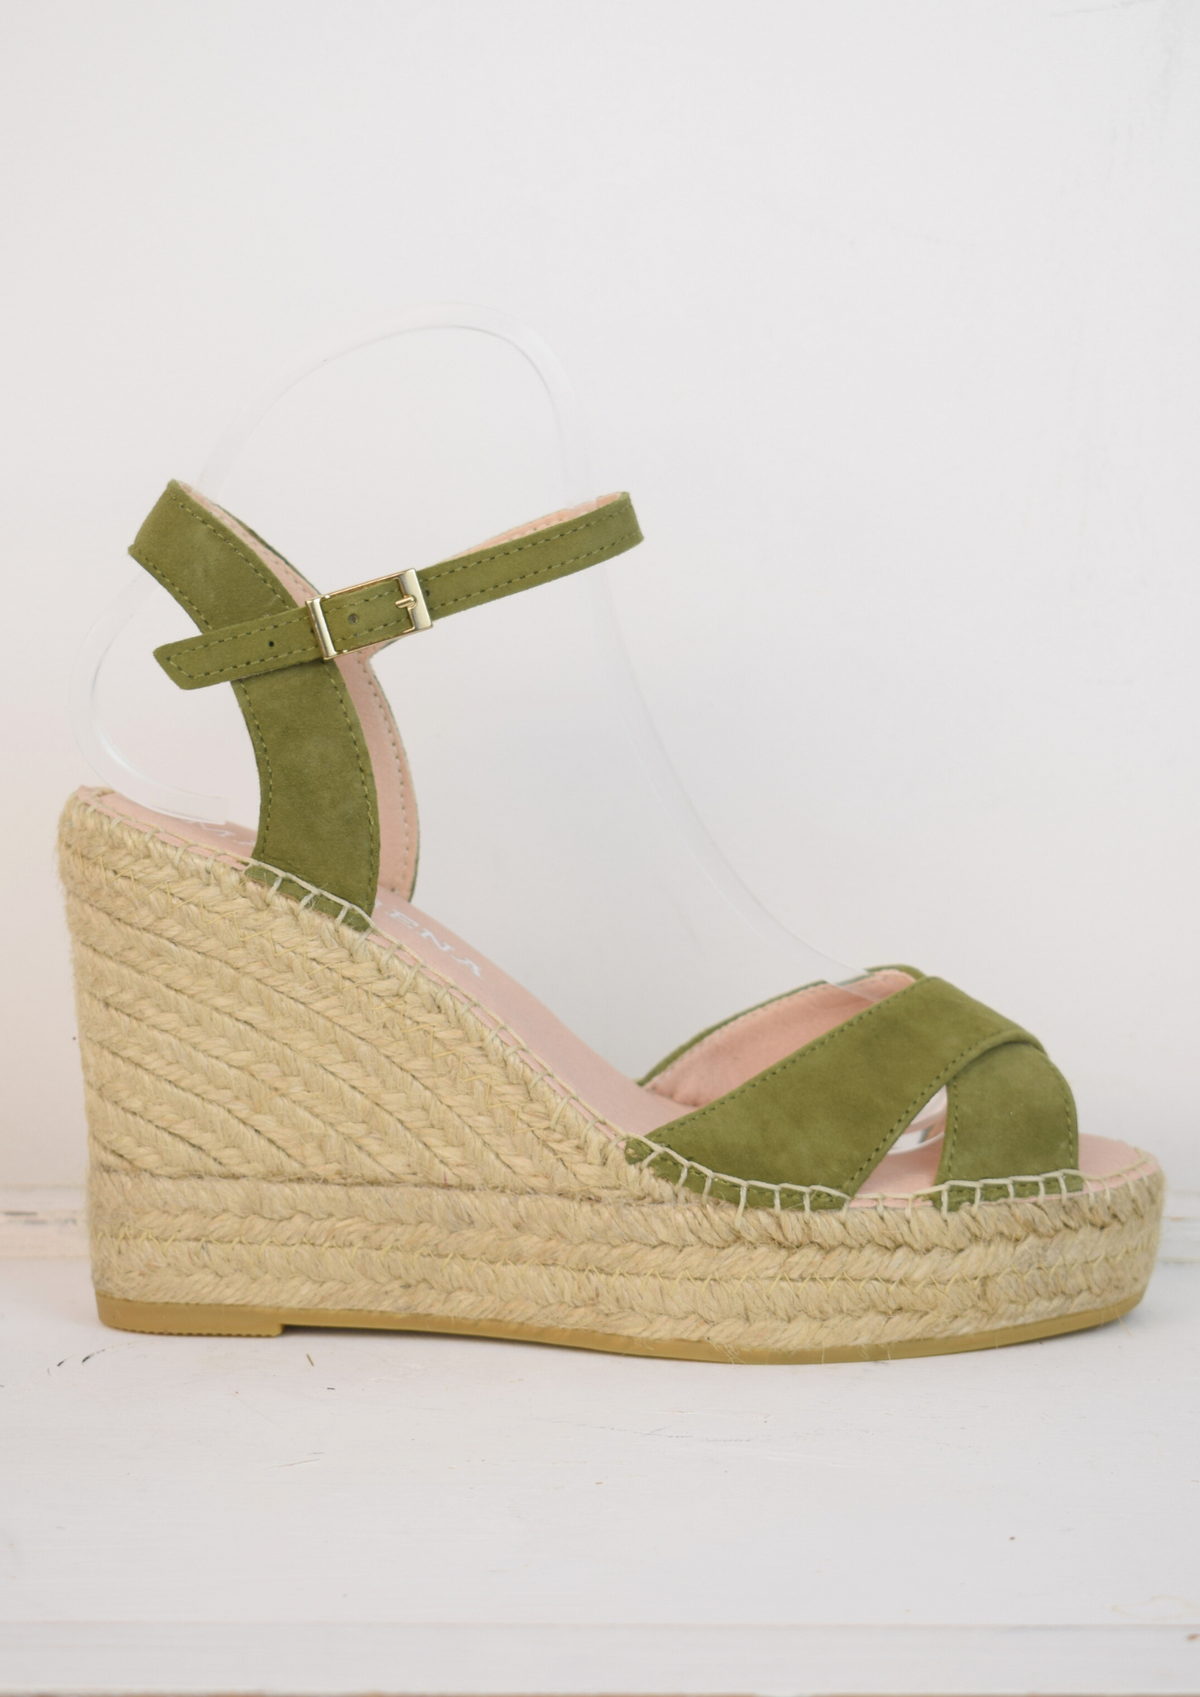 Wedge sandals with a green cross cover on the toes